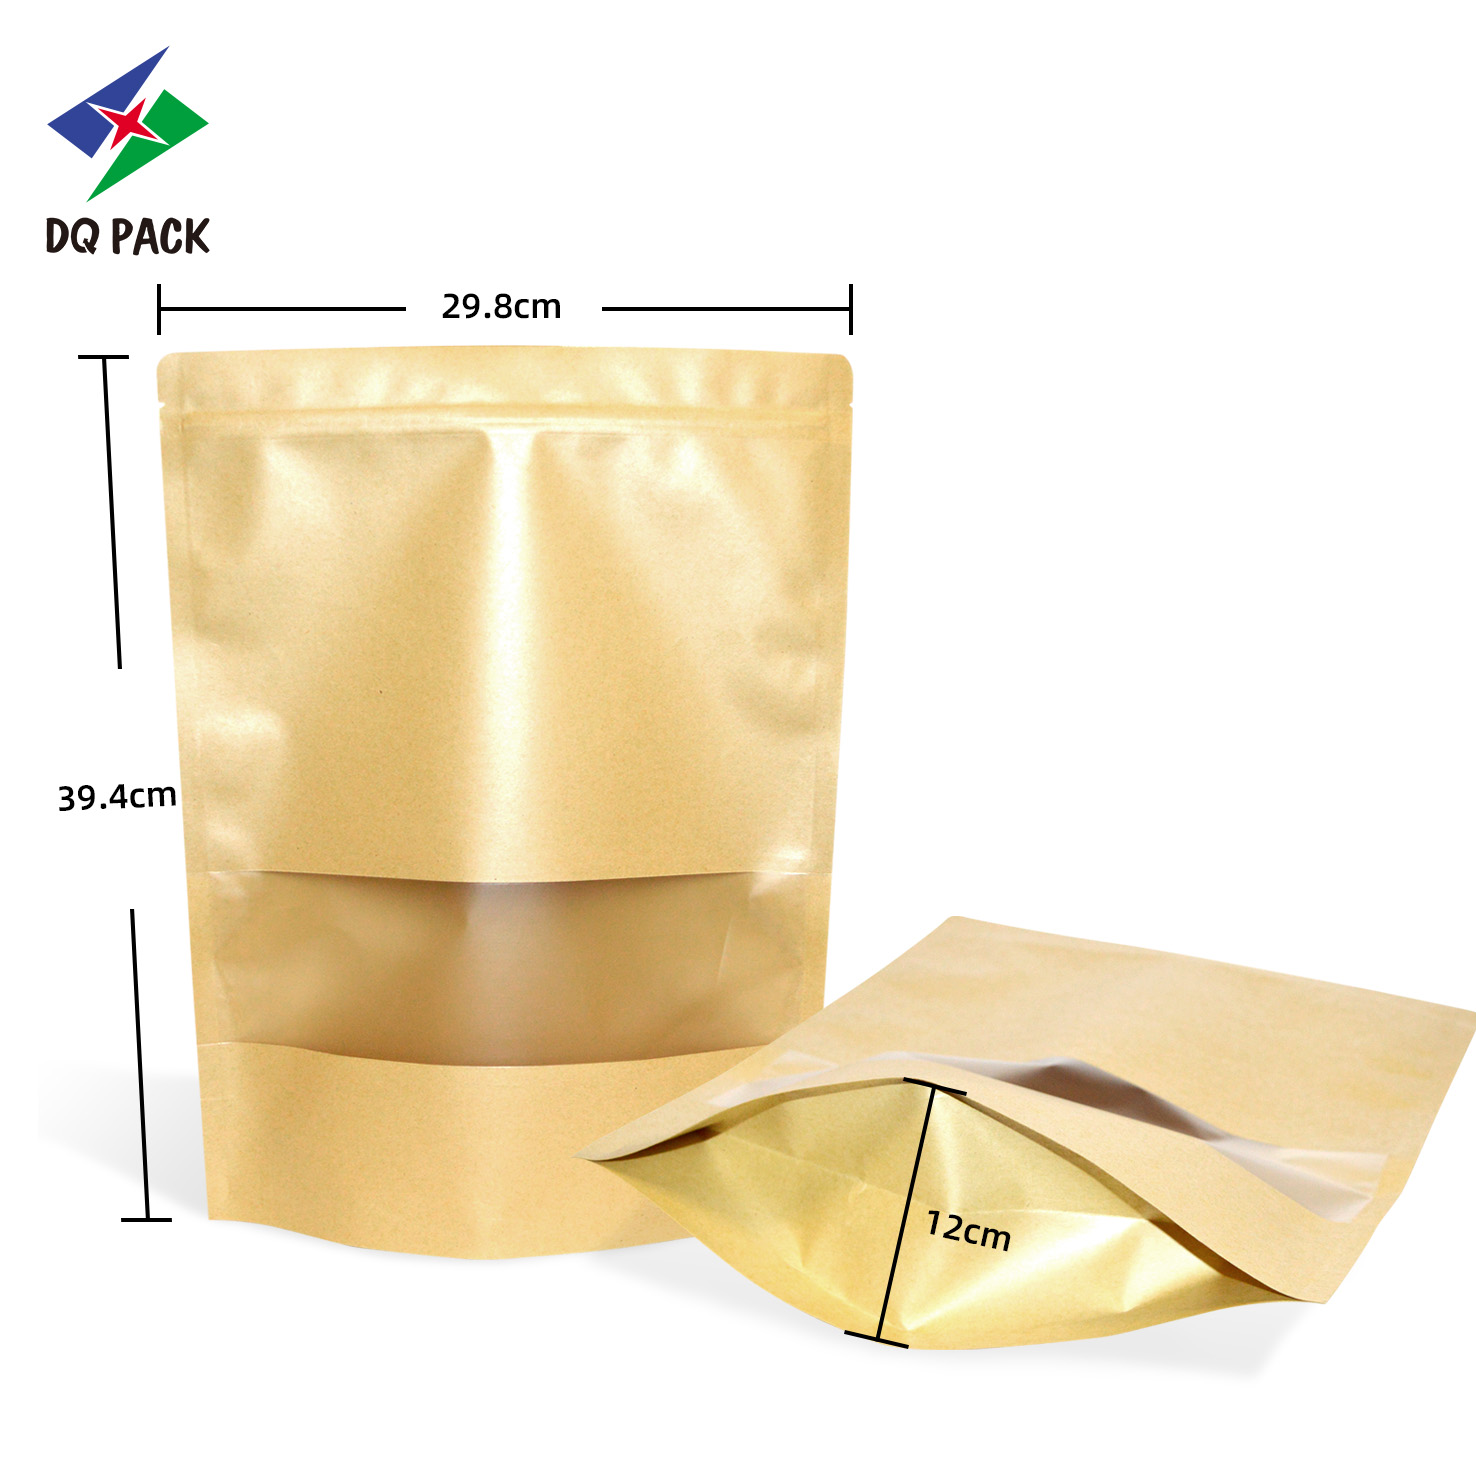 DQ PACK flexible factory bags other packaging materials water big capacity mylar bag stand up spout pouch plastic bag